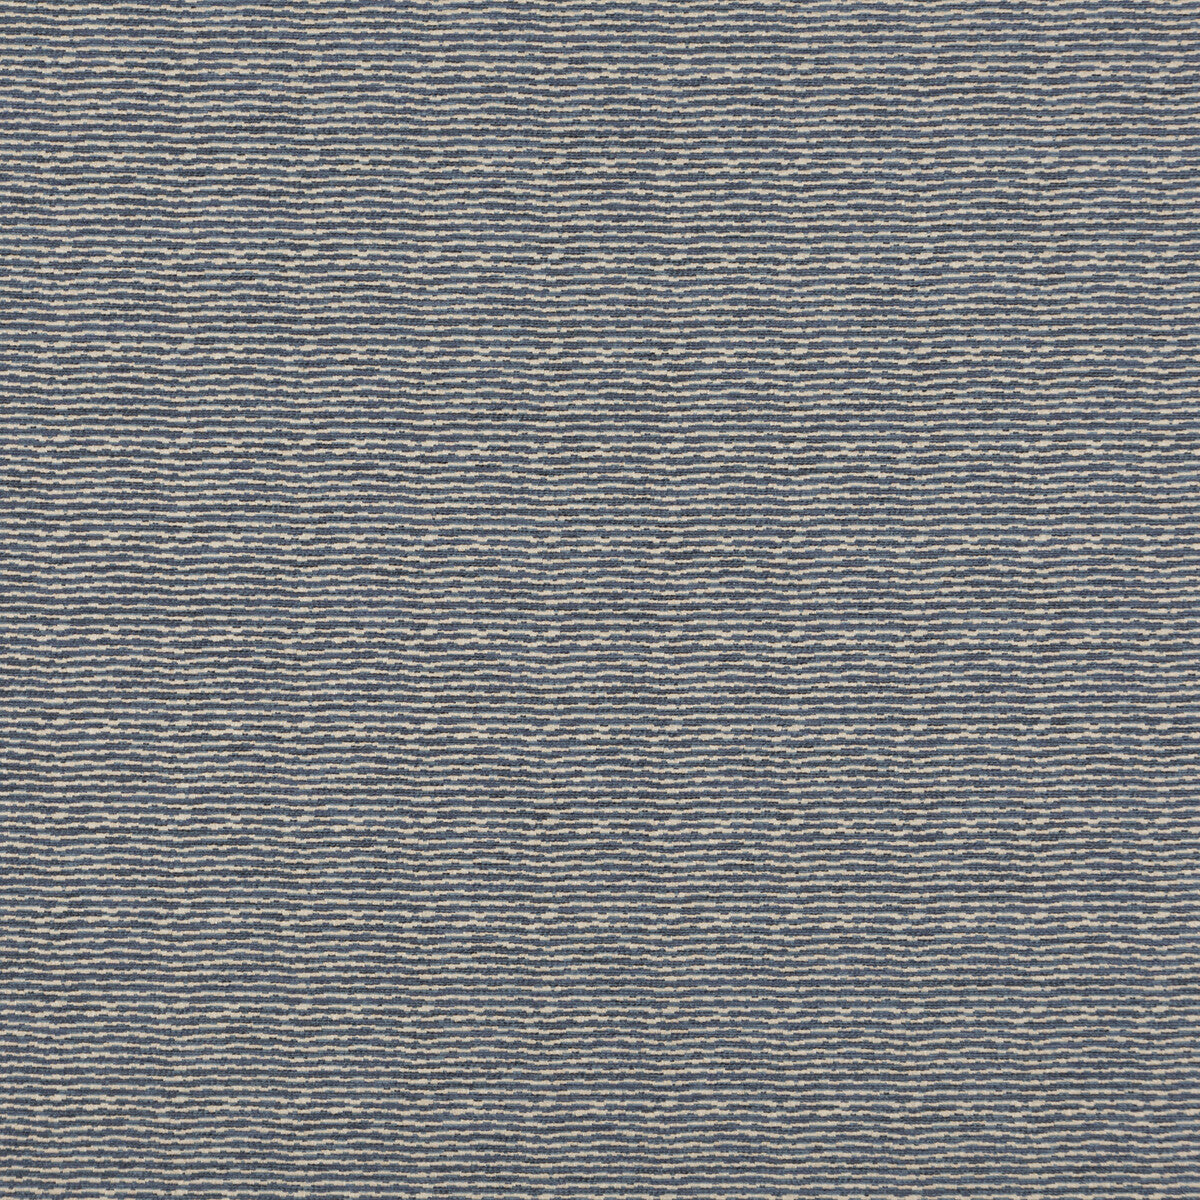 Esker fabric in indigo color - pattern BF10685.680.0 - by G P &amp; J Baker in the Essential Colours II collection